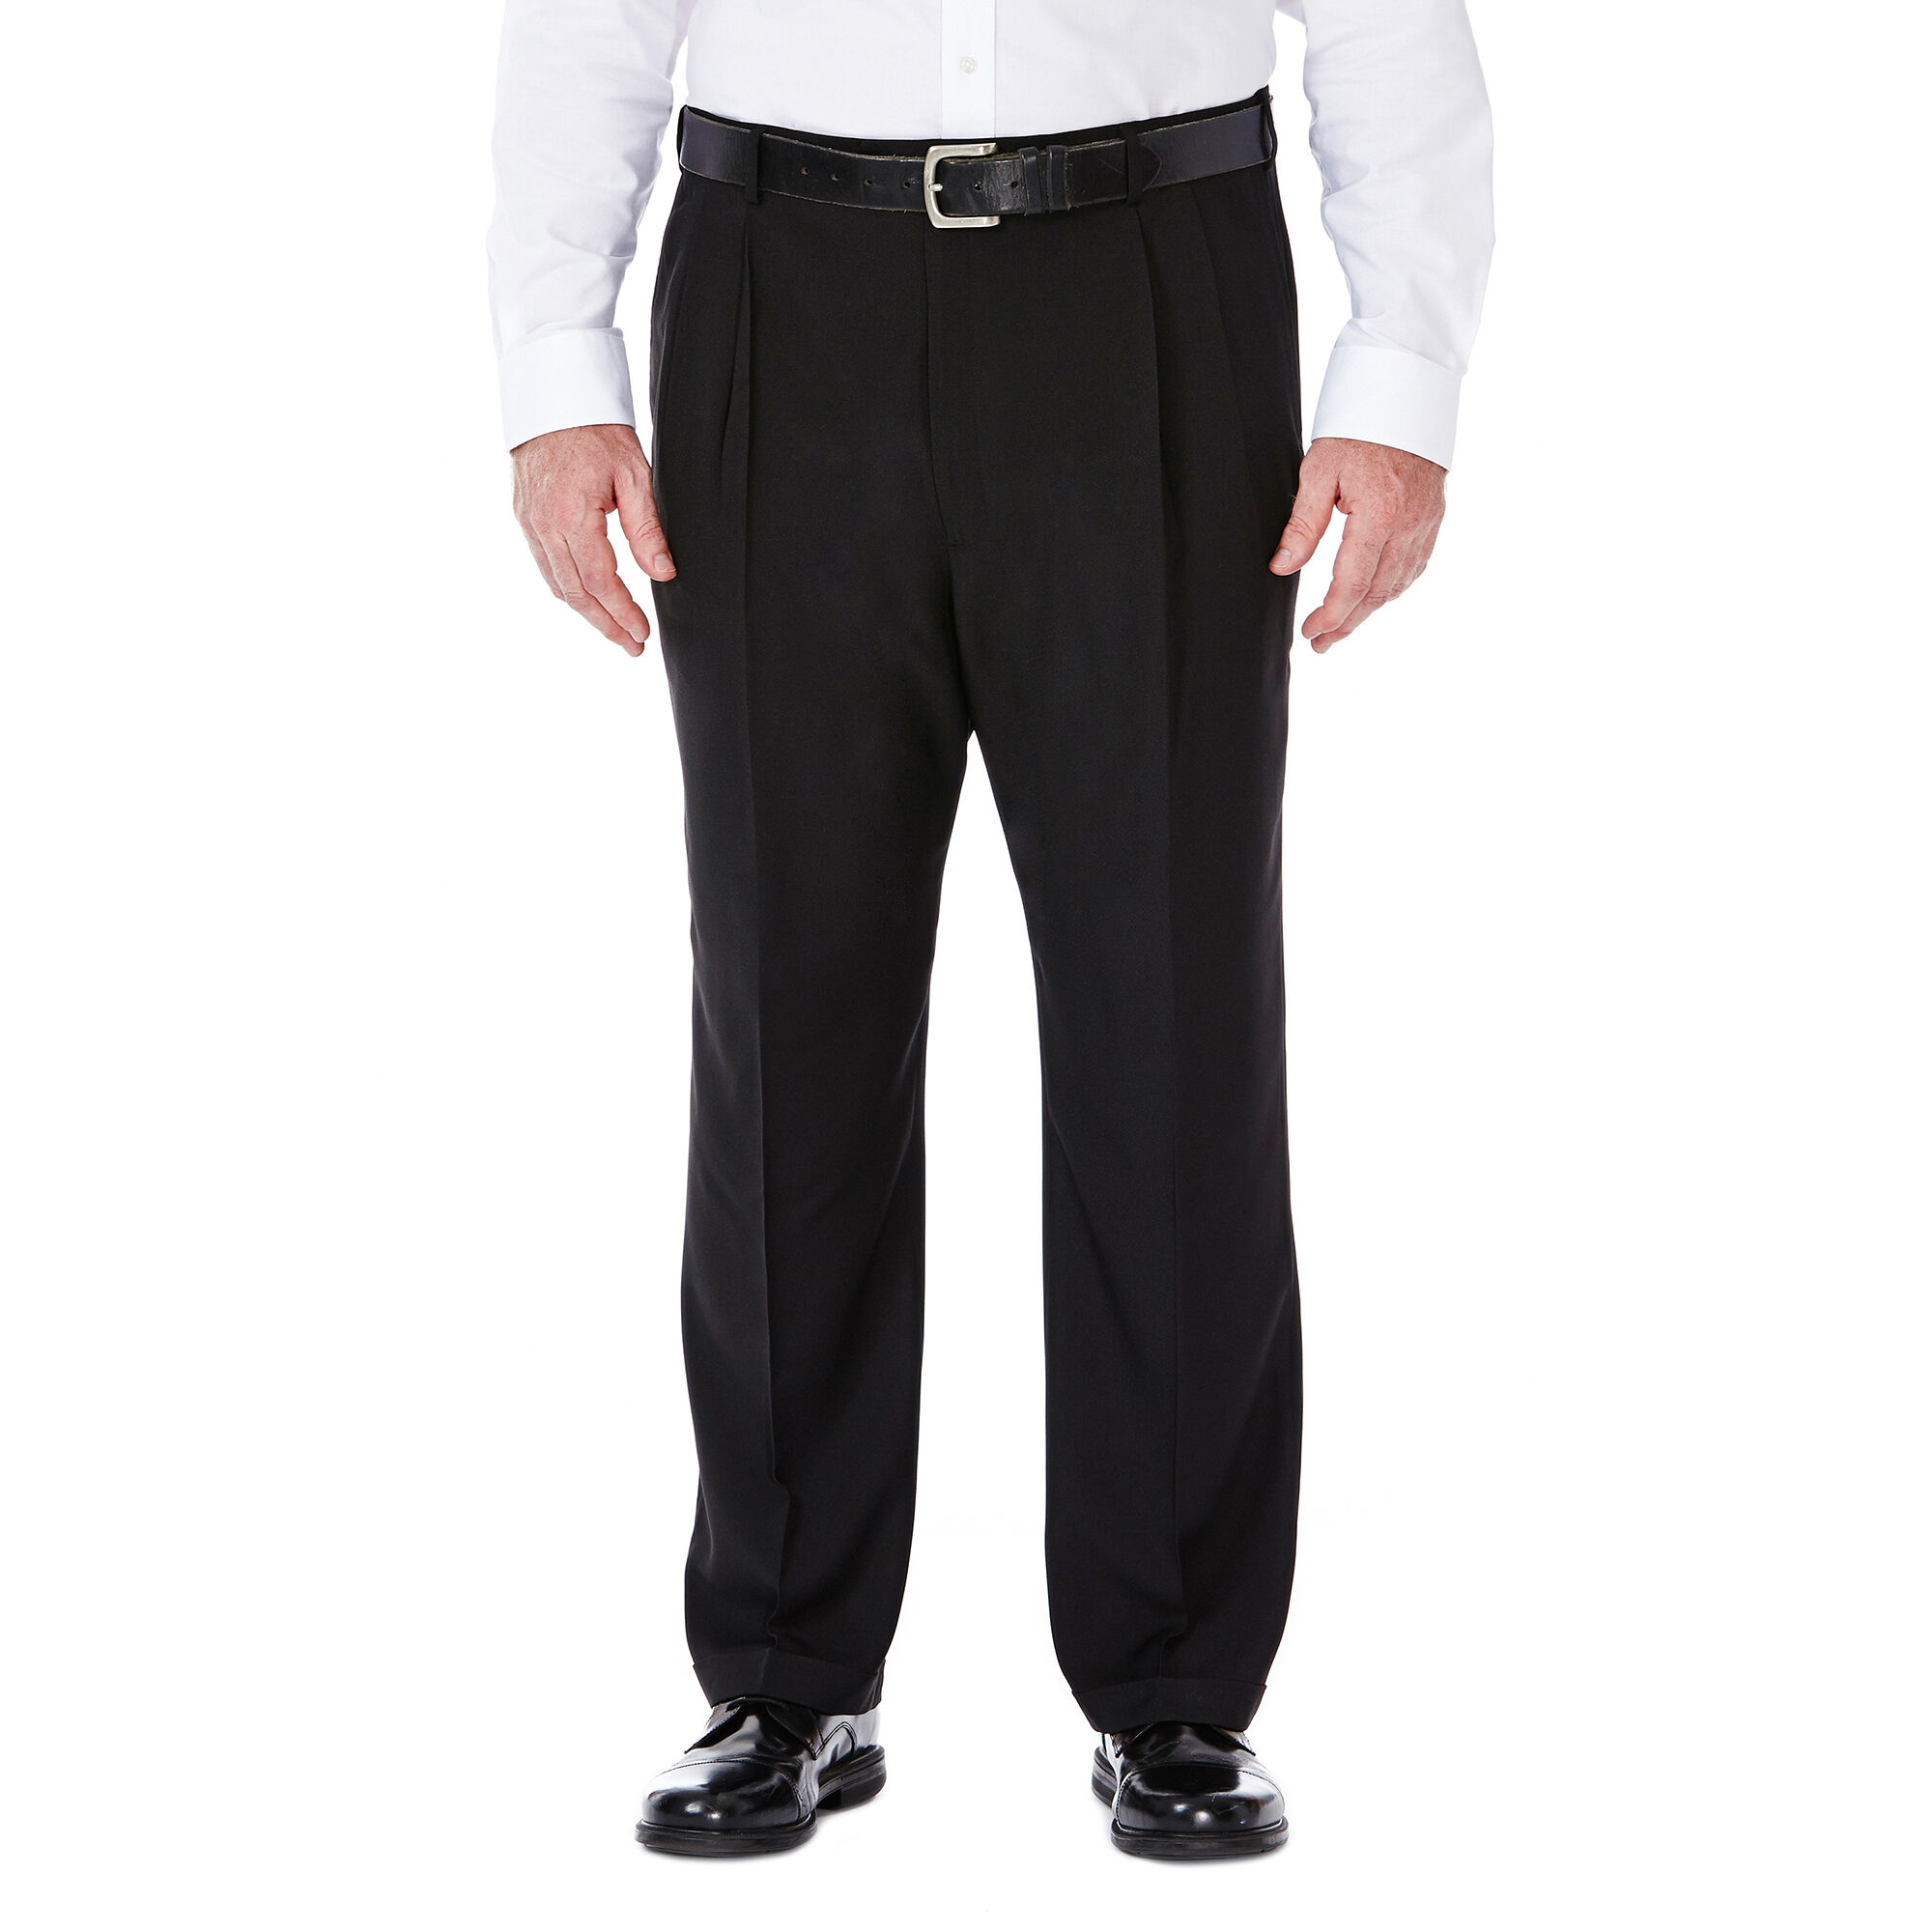 Haggar Men's eCLo Expandable-Waist Flat Front Straight Fit Dress Pant Chocolate 